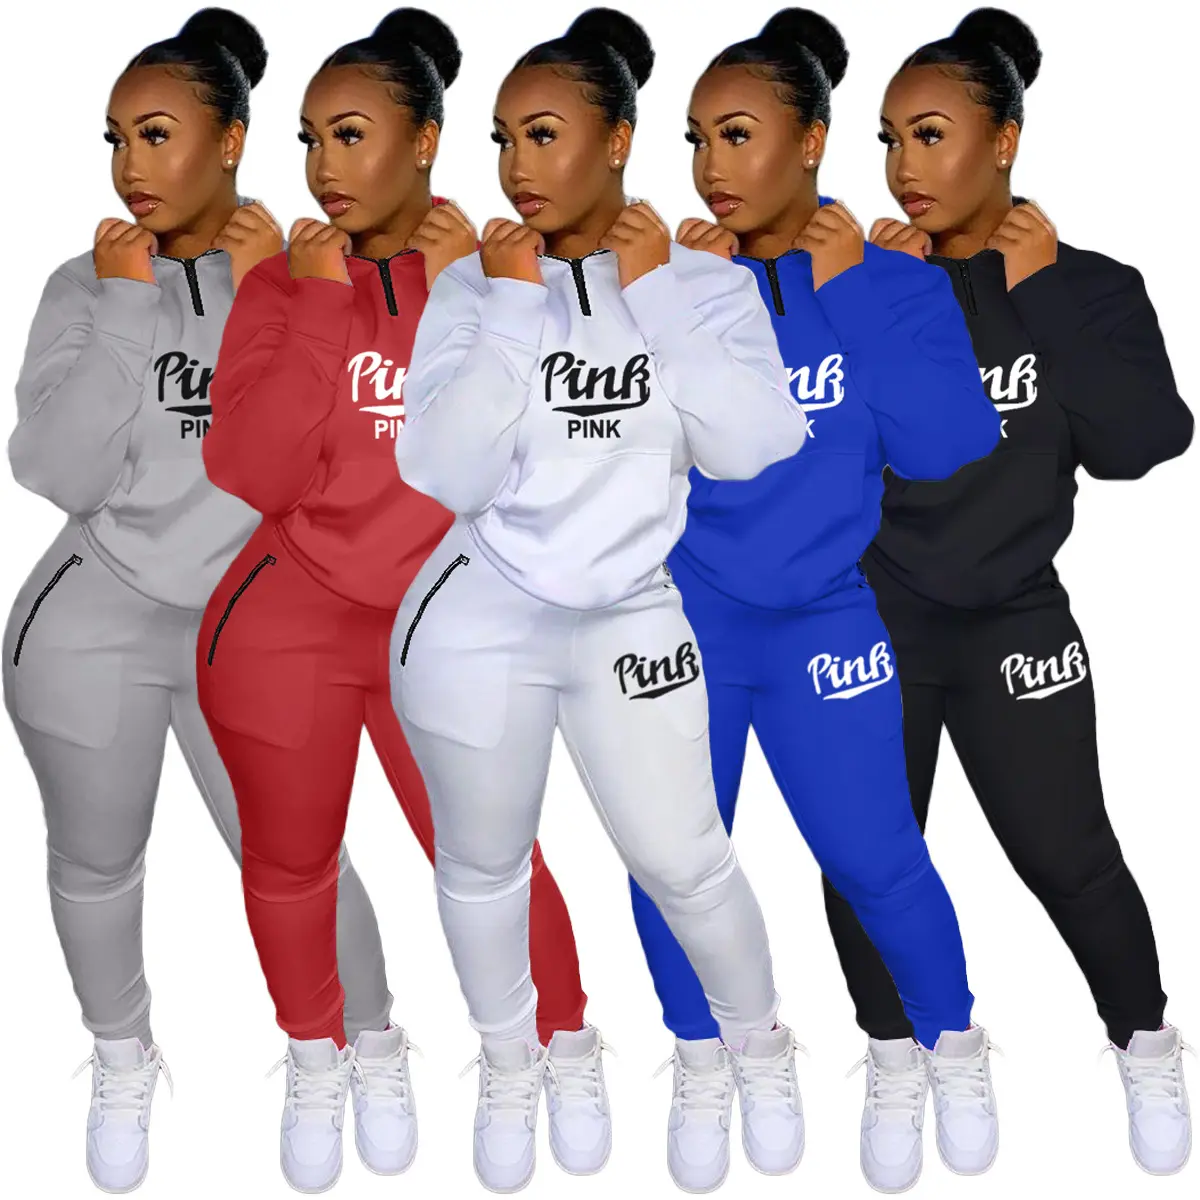 2022 Winter Women Clothing Long Sleeve Tracksuits Sweatsuit 2 Piece Set Pink Letter Two Piece Leisure Sports Suit